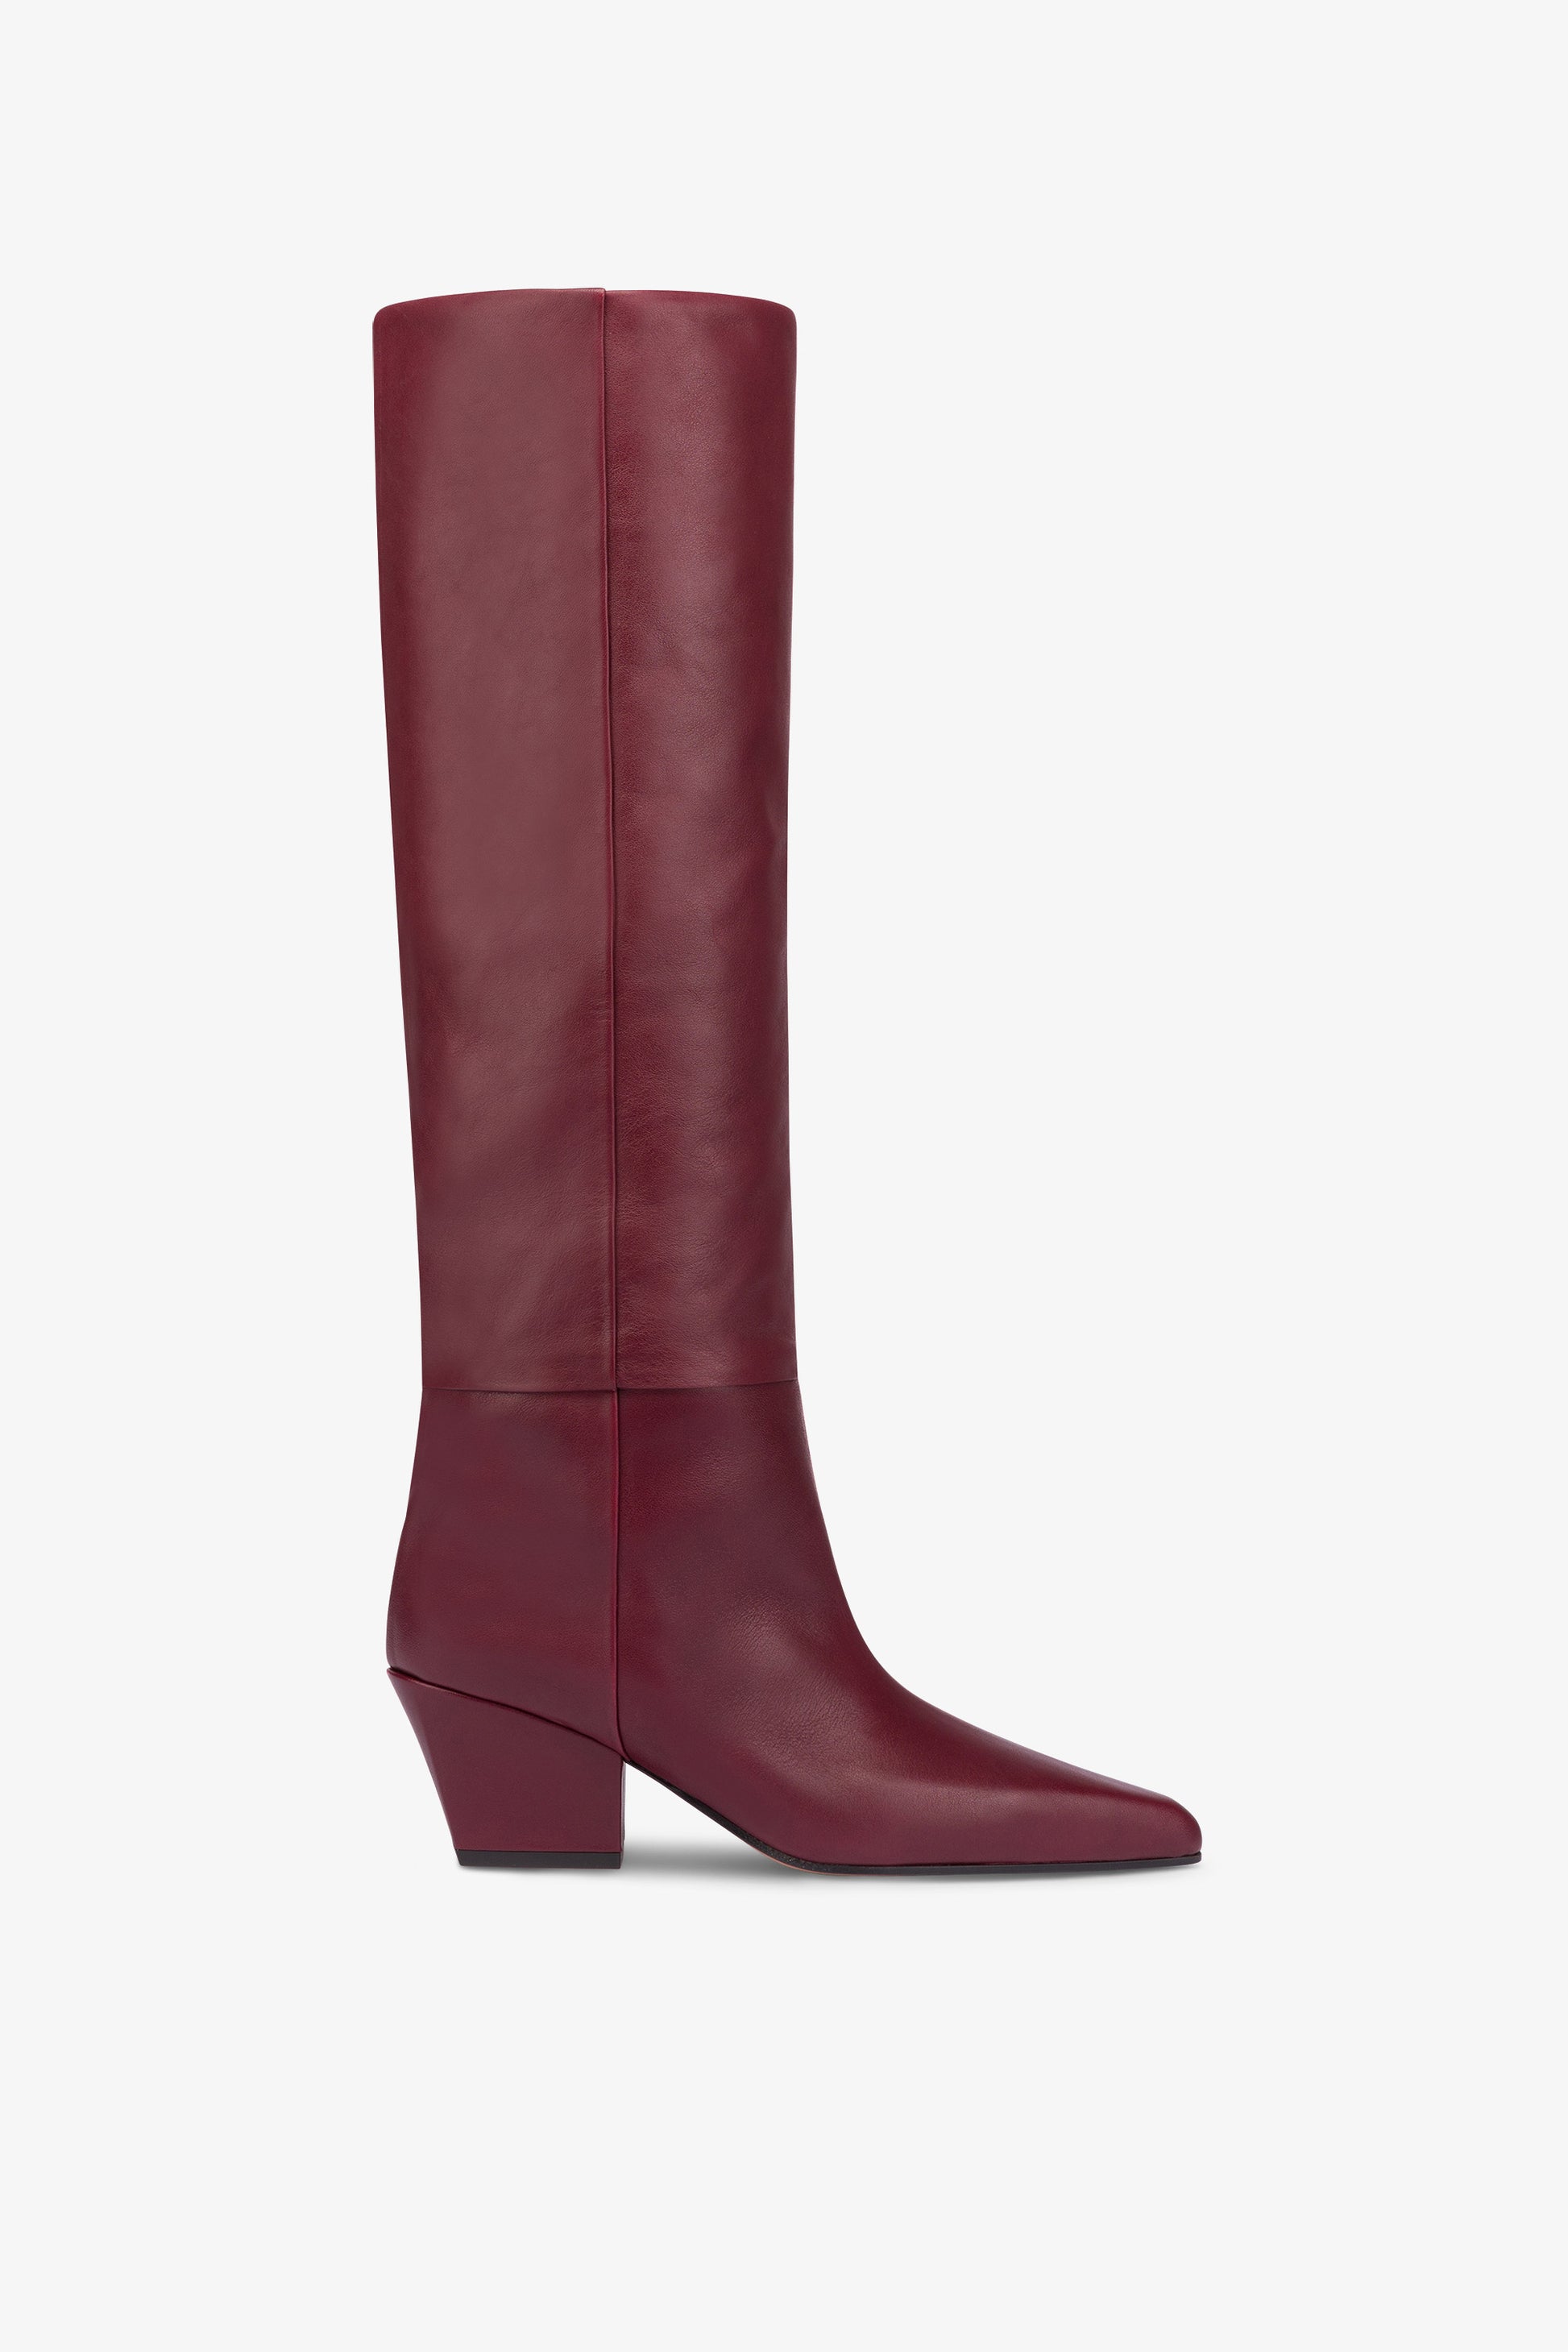 Knee-high, long pointed boot in supple rouge noir leather